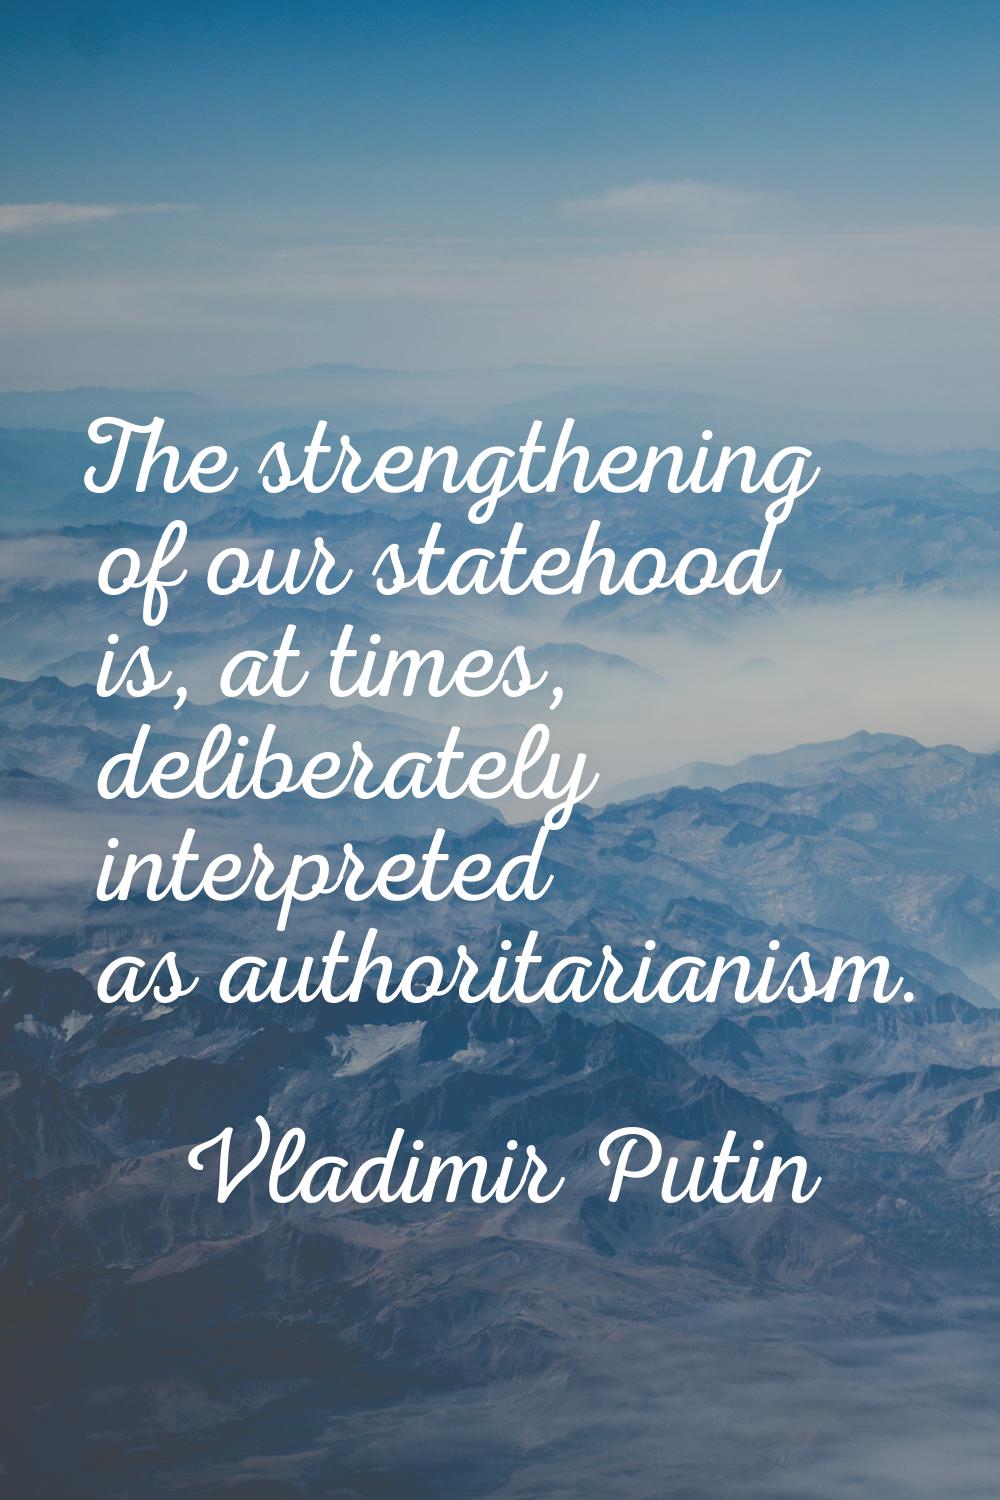 The strengthening of our statehood is, at times, deliberately interpreted as authoritarianism.